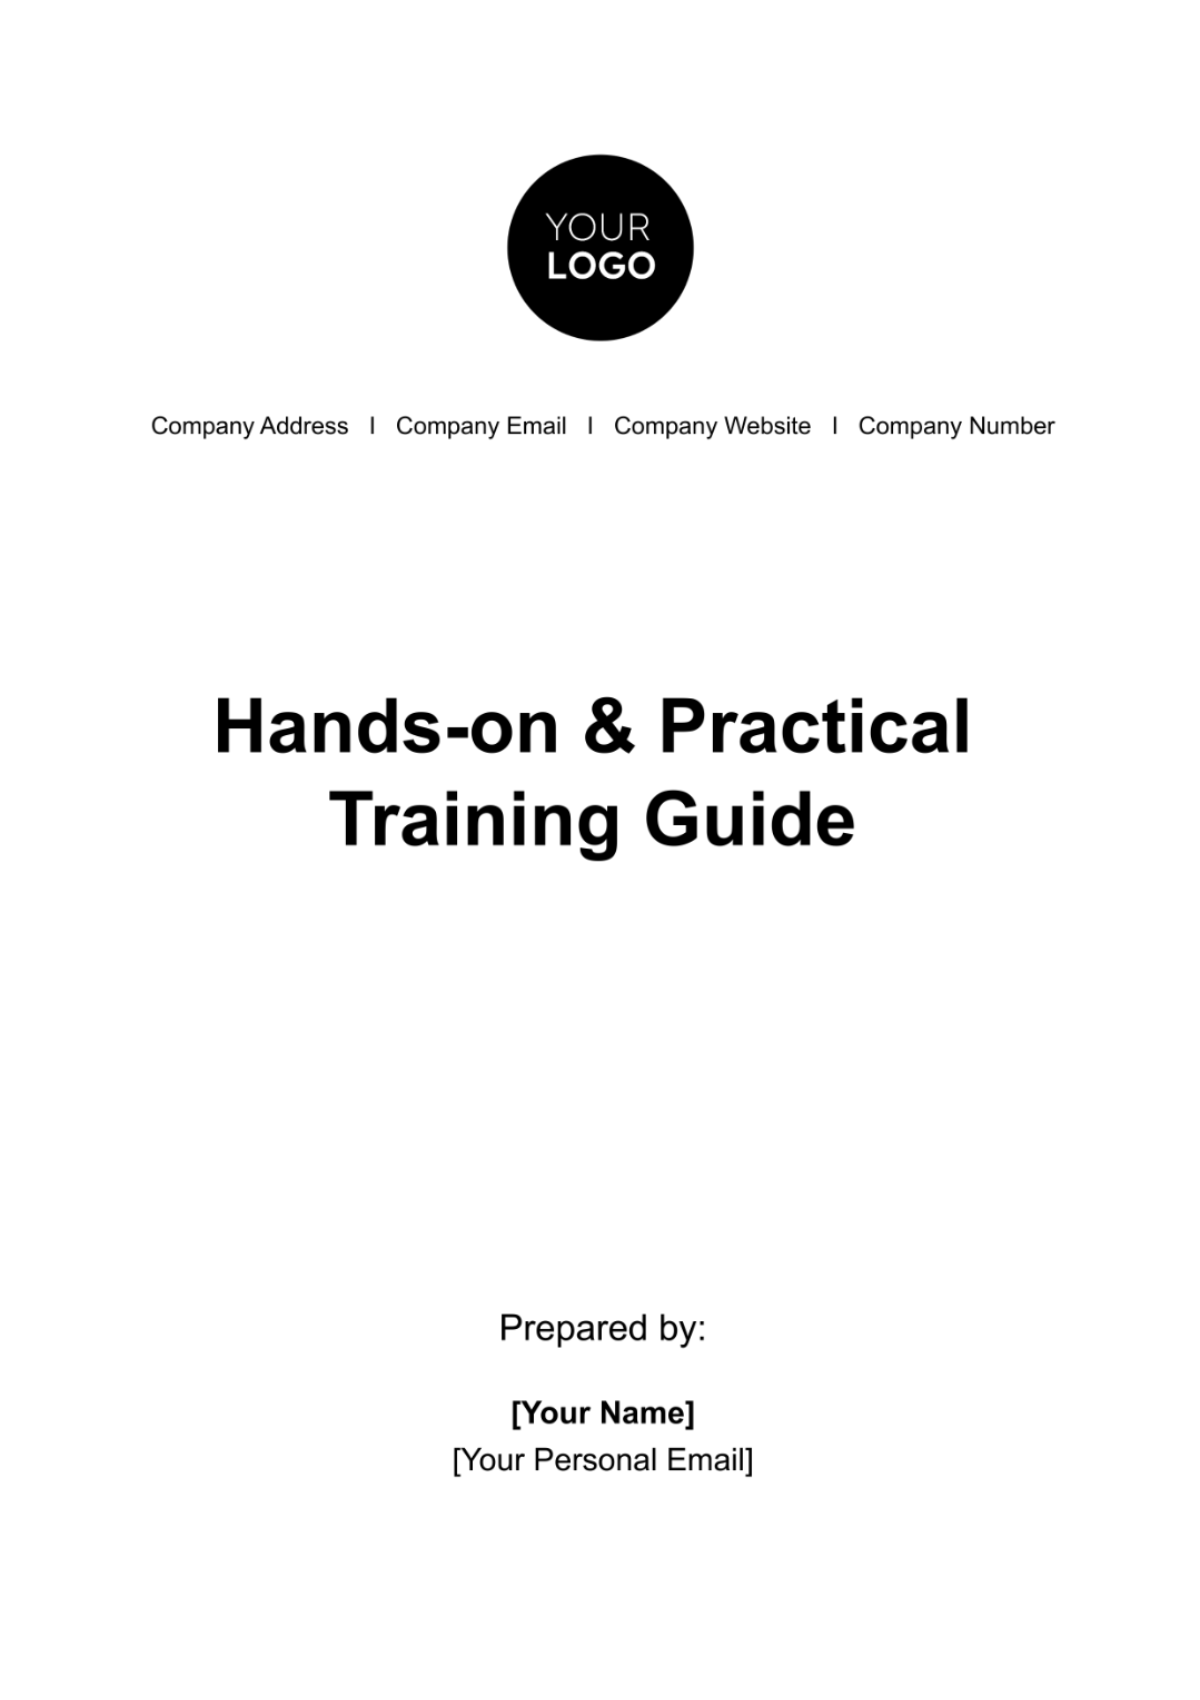 Free Hands-on & Practical Training Guide HR Template